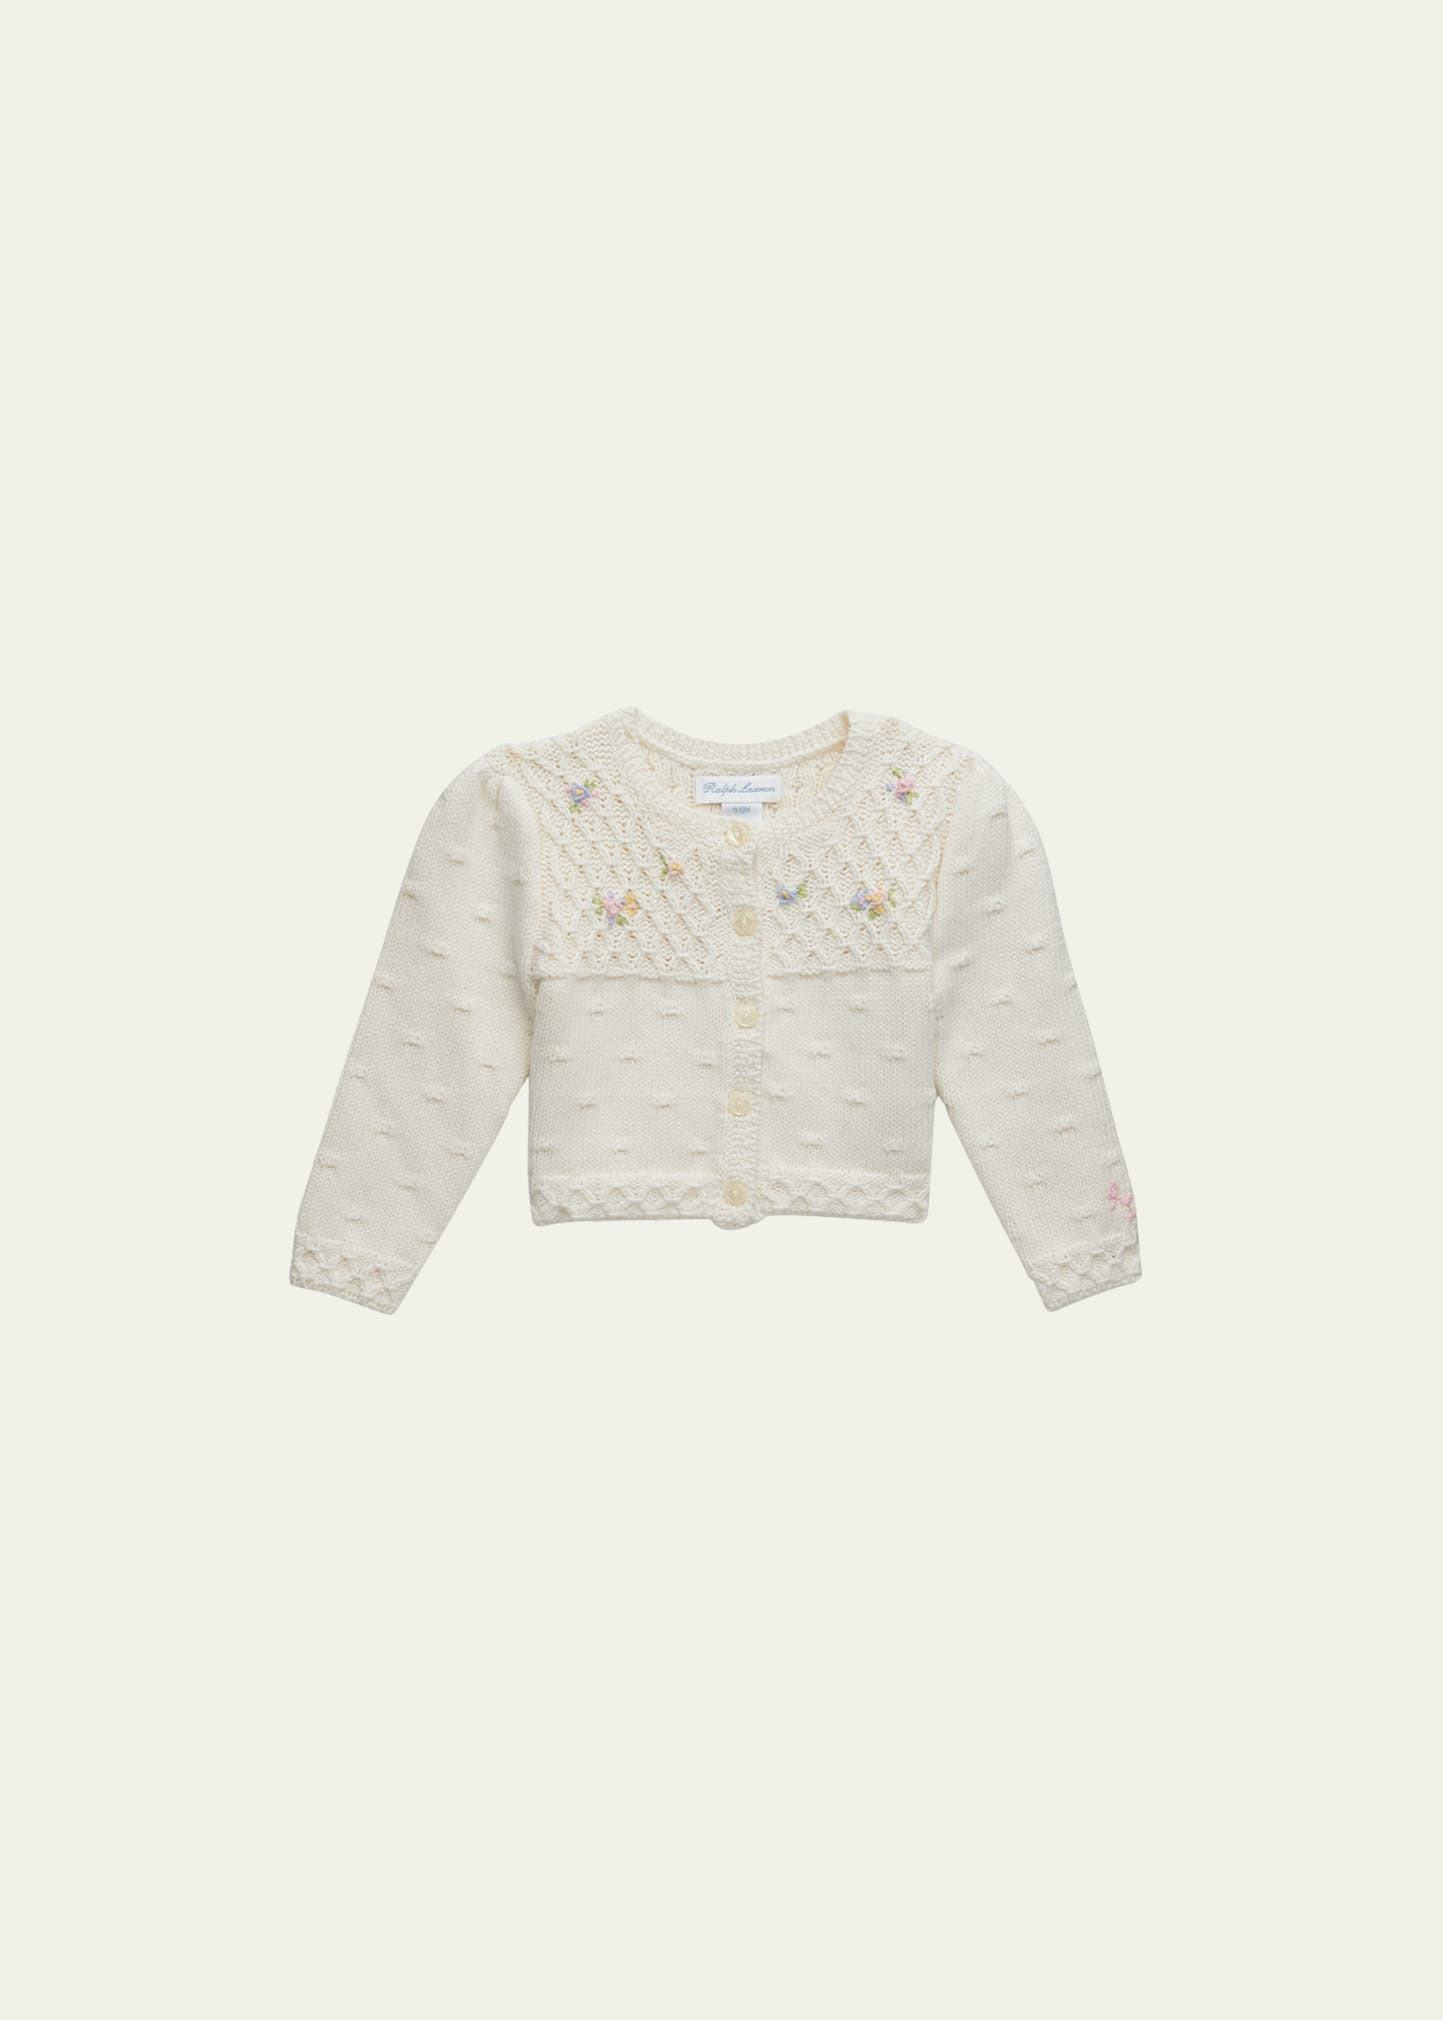 Ralph Lauren Kids' Girl's Embroidered Flowers Knit Cardigan In Clubhouse Cream